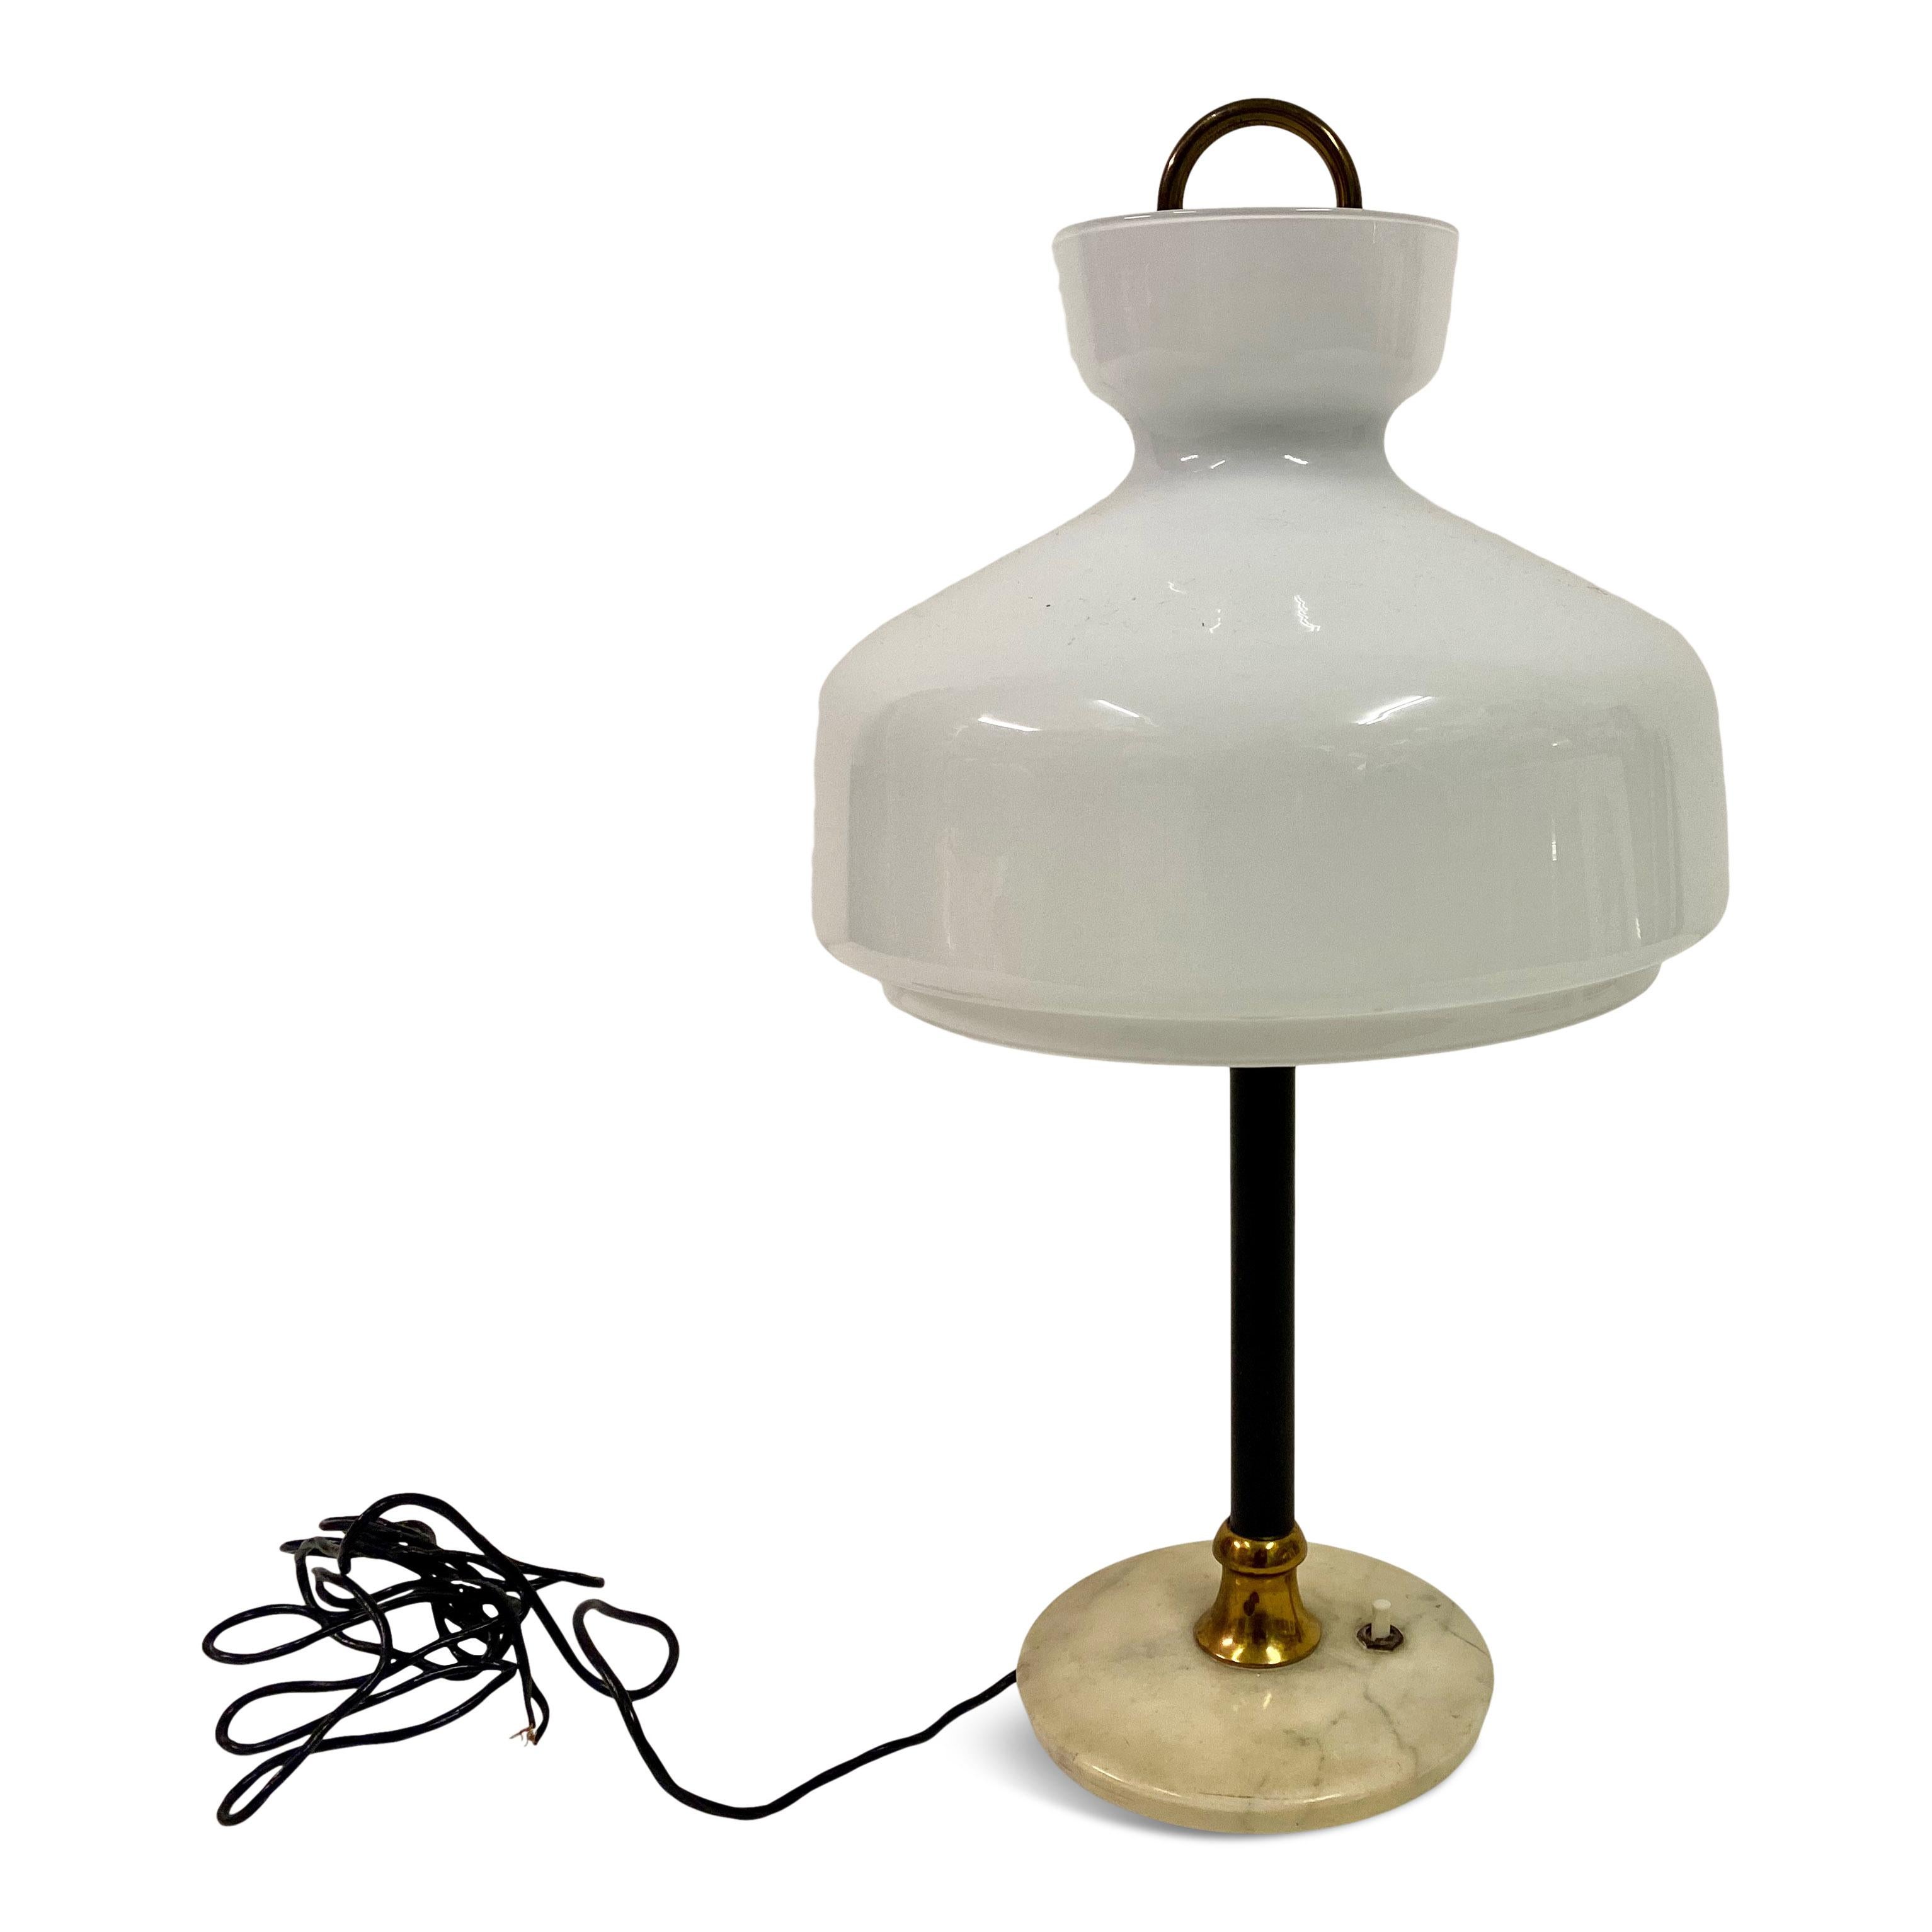 Table lamp

White opaline glass shade

Black metal stem

Marble base

Brass ring

Italy 1950s.